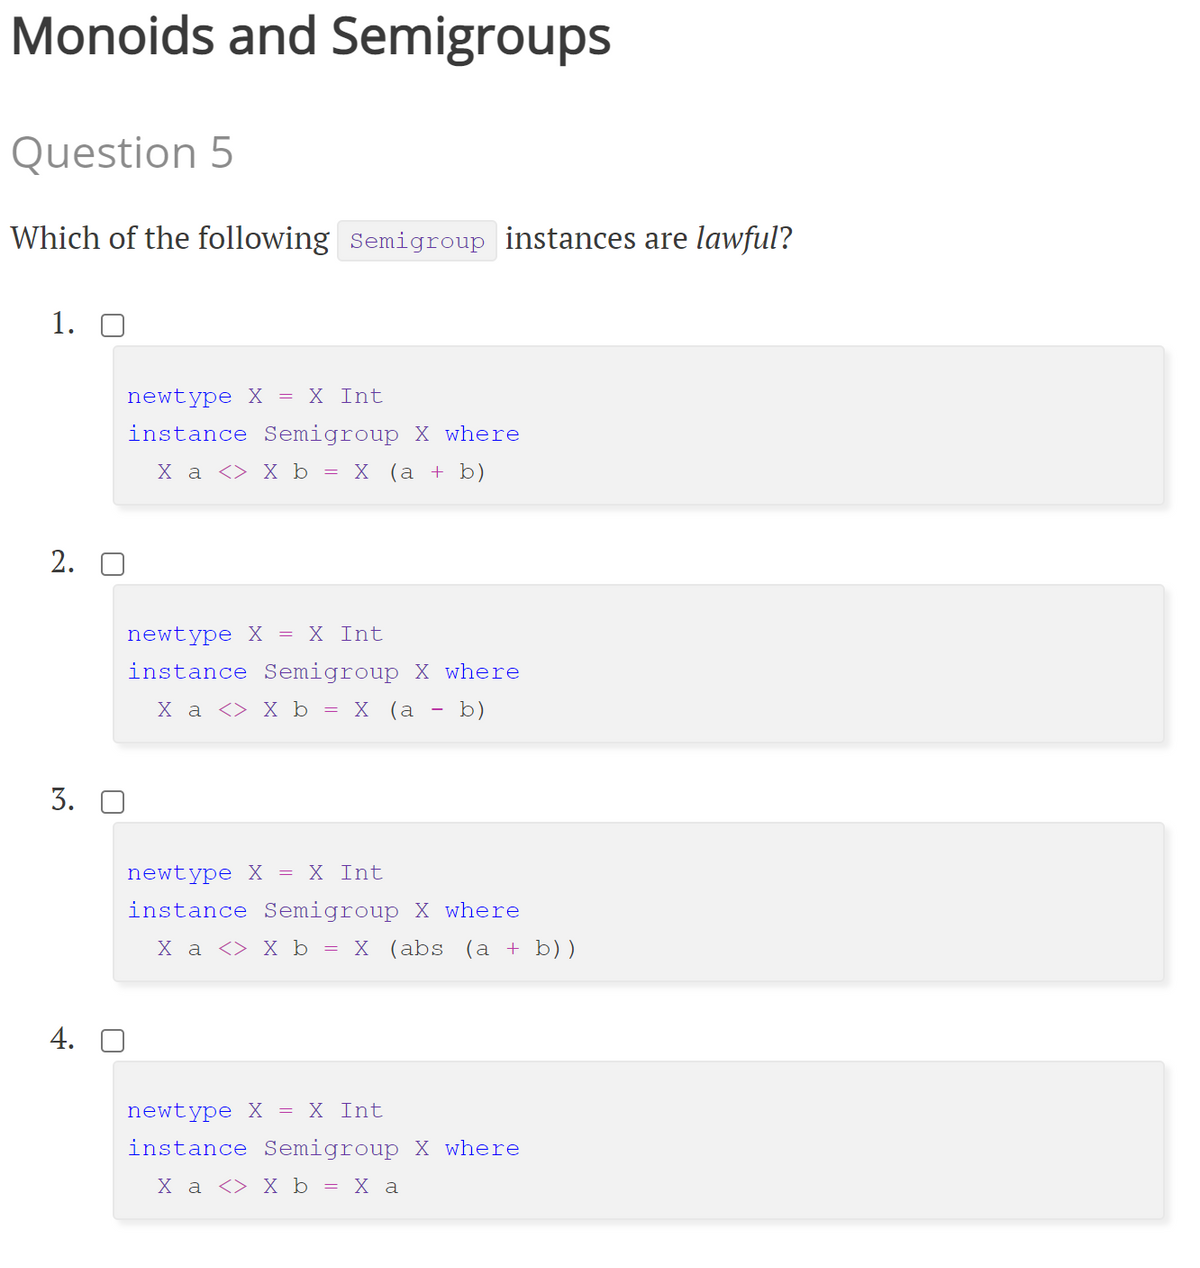 Monoids and Semigroups
Question 5
Which of the following Semigroup instances are lawful?
1. О
newtype X = X Int
instance Semigroup X where
Ха <> Х ь 3D х (а + b)
2. O
newtype X = X Int
instance Semigroup X where
Ха <> X ь 3D х (а — b)
3.
newtype X = X Int
instance Semigroup X where
Ха <> Х ь - х (аbs (a + b))
4. O
newtype X = X Int
instance Semigroup X where
Ха <> X ь %3D Ха
